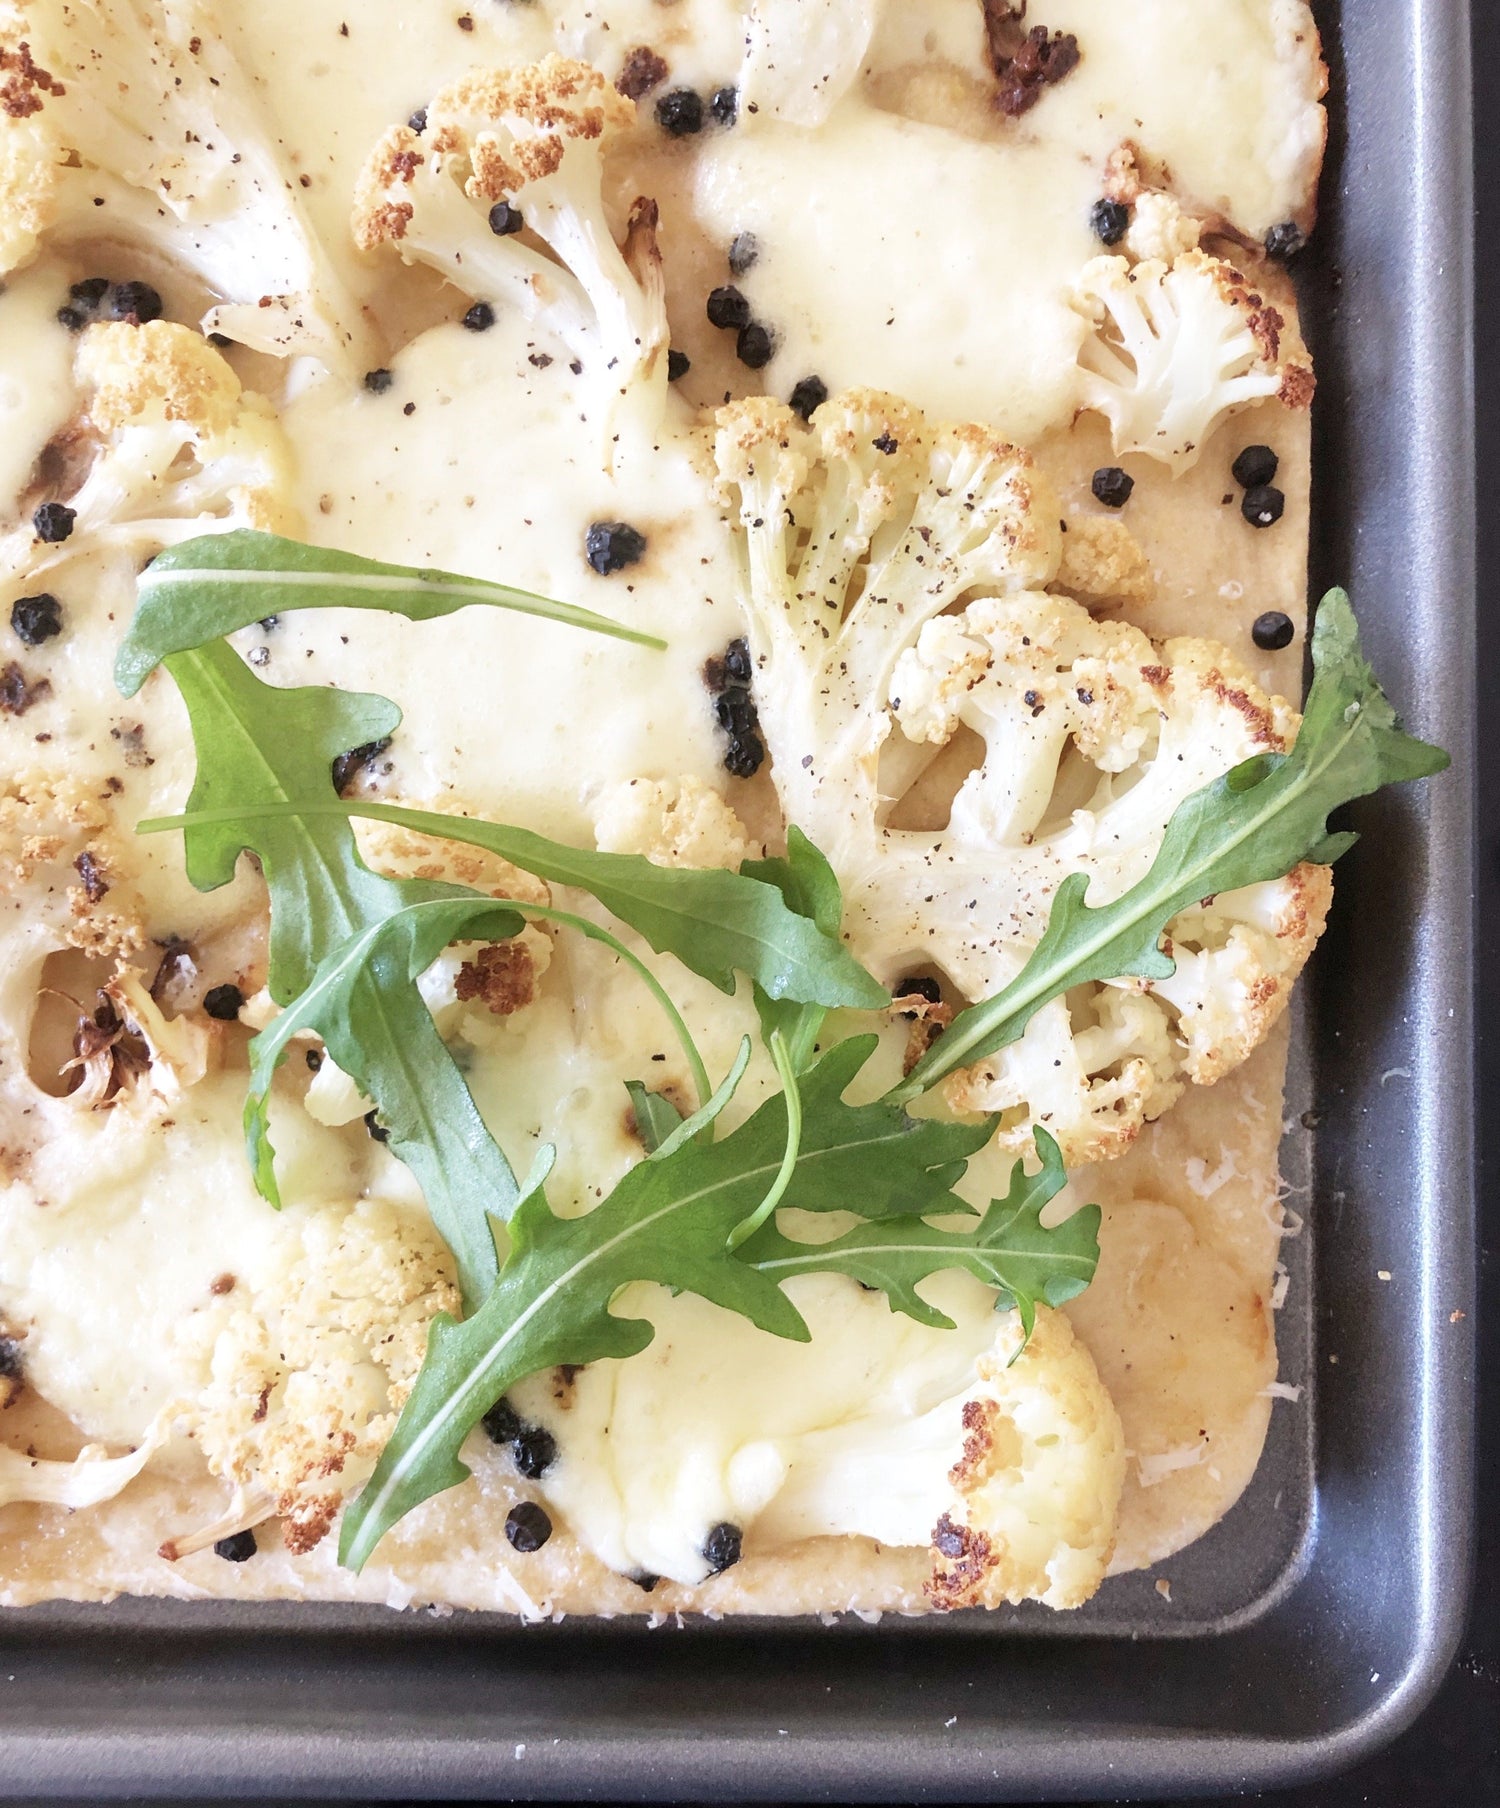 BrightRx: Sheet Pan Pizza with Roasted Cauliflower & Greens